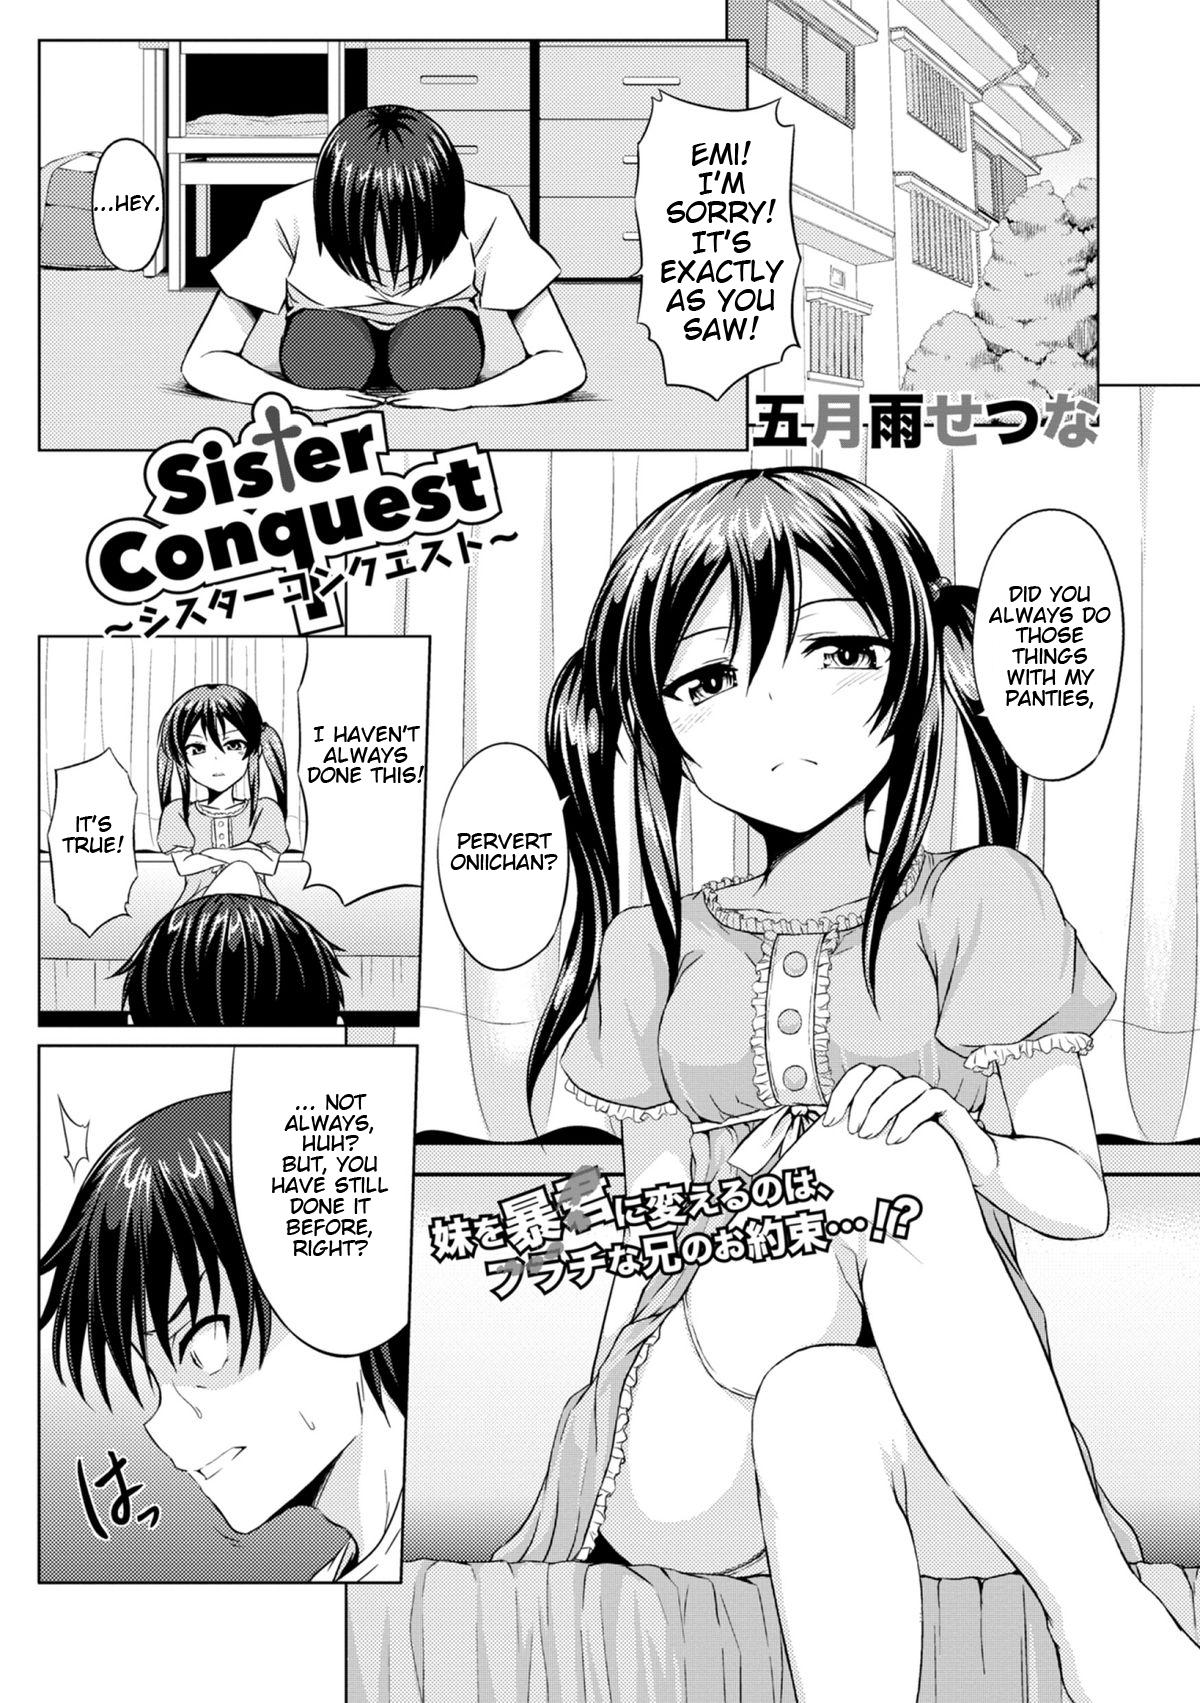 Hentai: Sister Conquest You are reading: Sister Conquest.